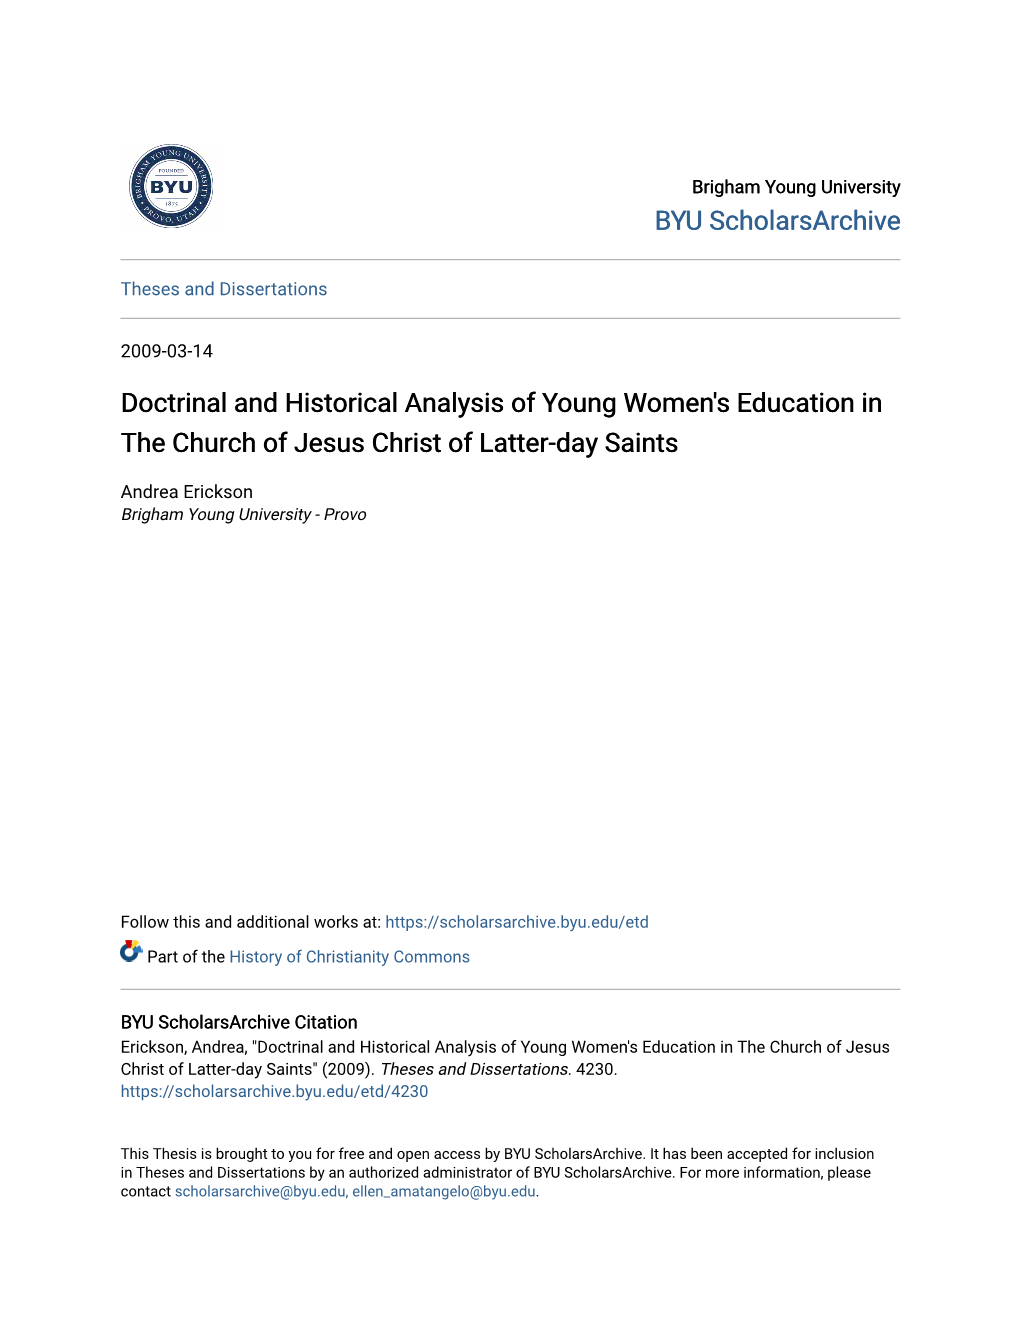 Doctrinal and Historical Analysis of Young Women's Education in the Church of Jesus Christ of Latter-Day Saints